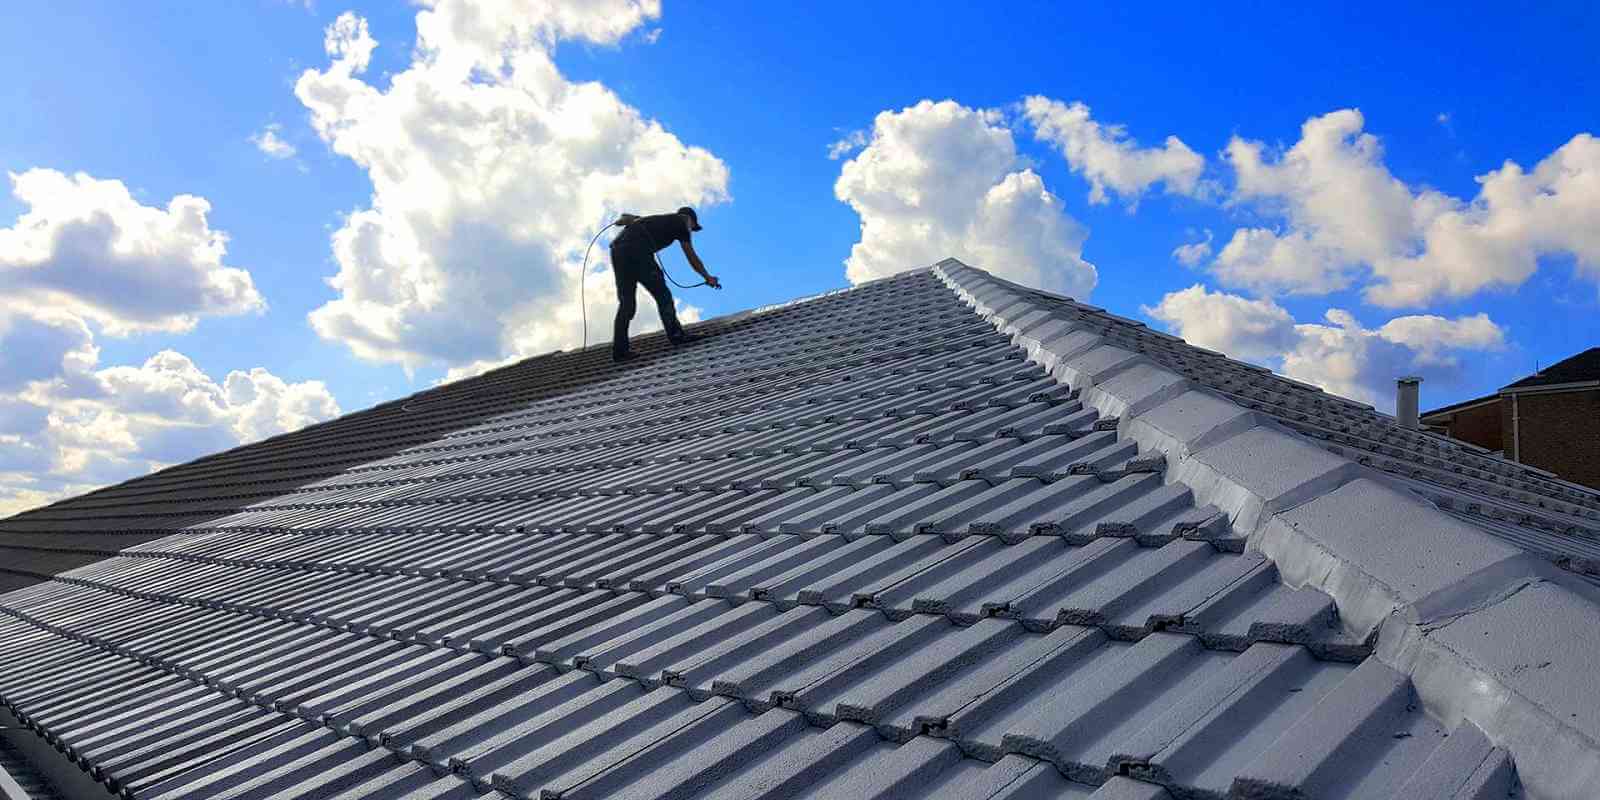 Materials to consider for Roofing Your Home